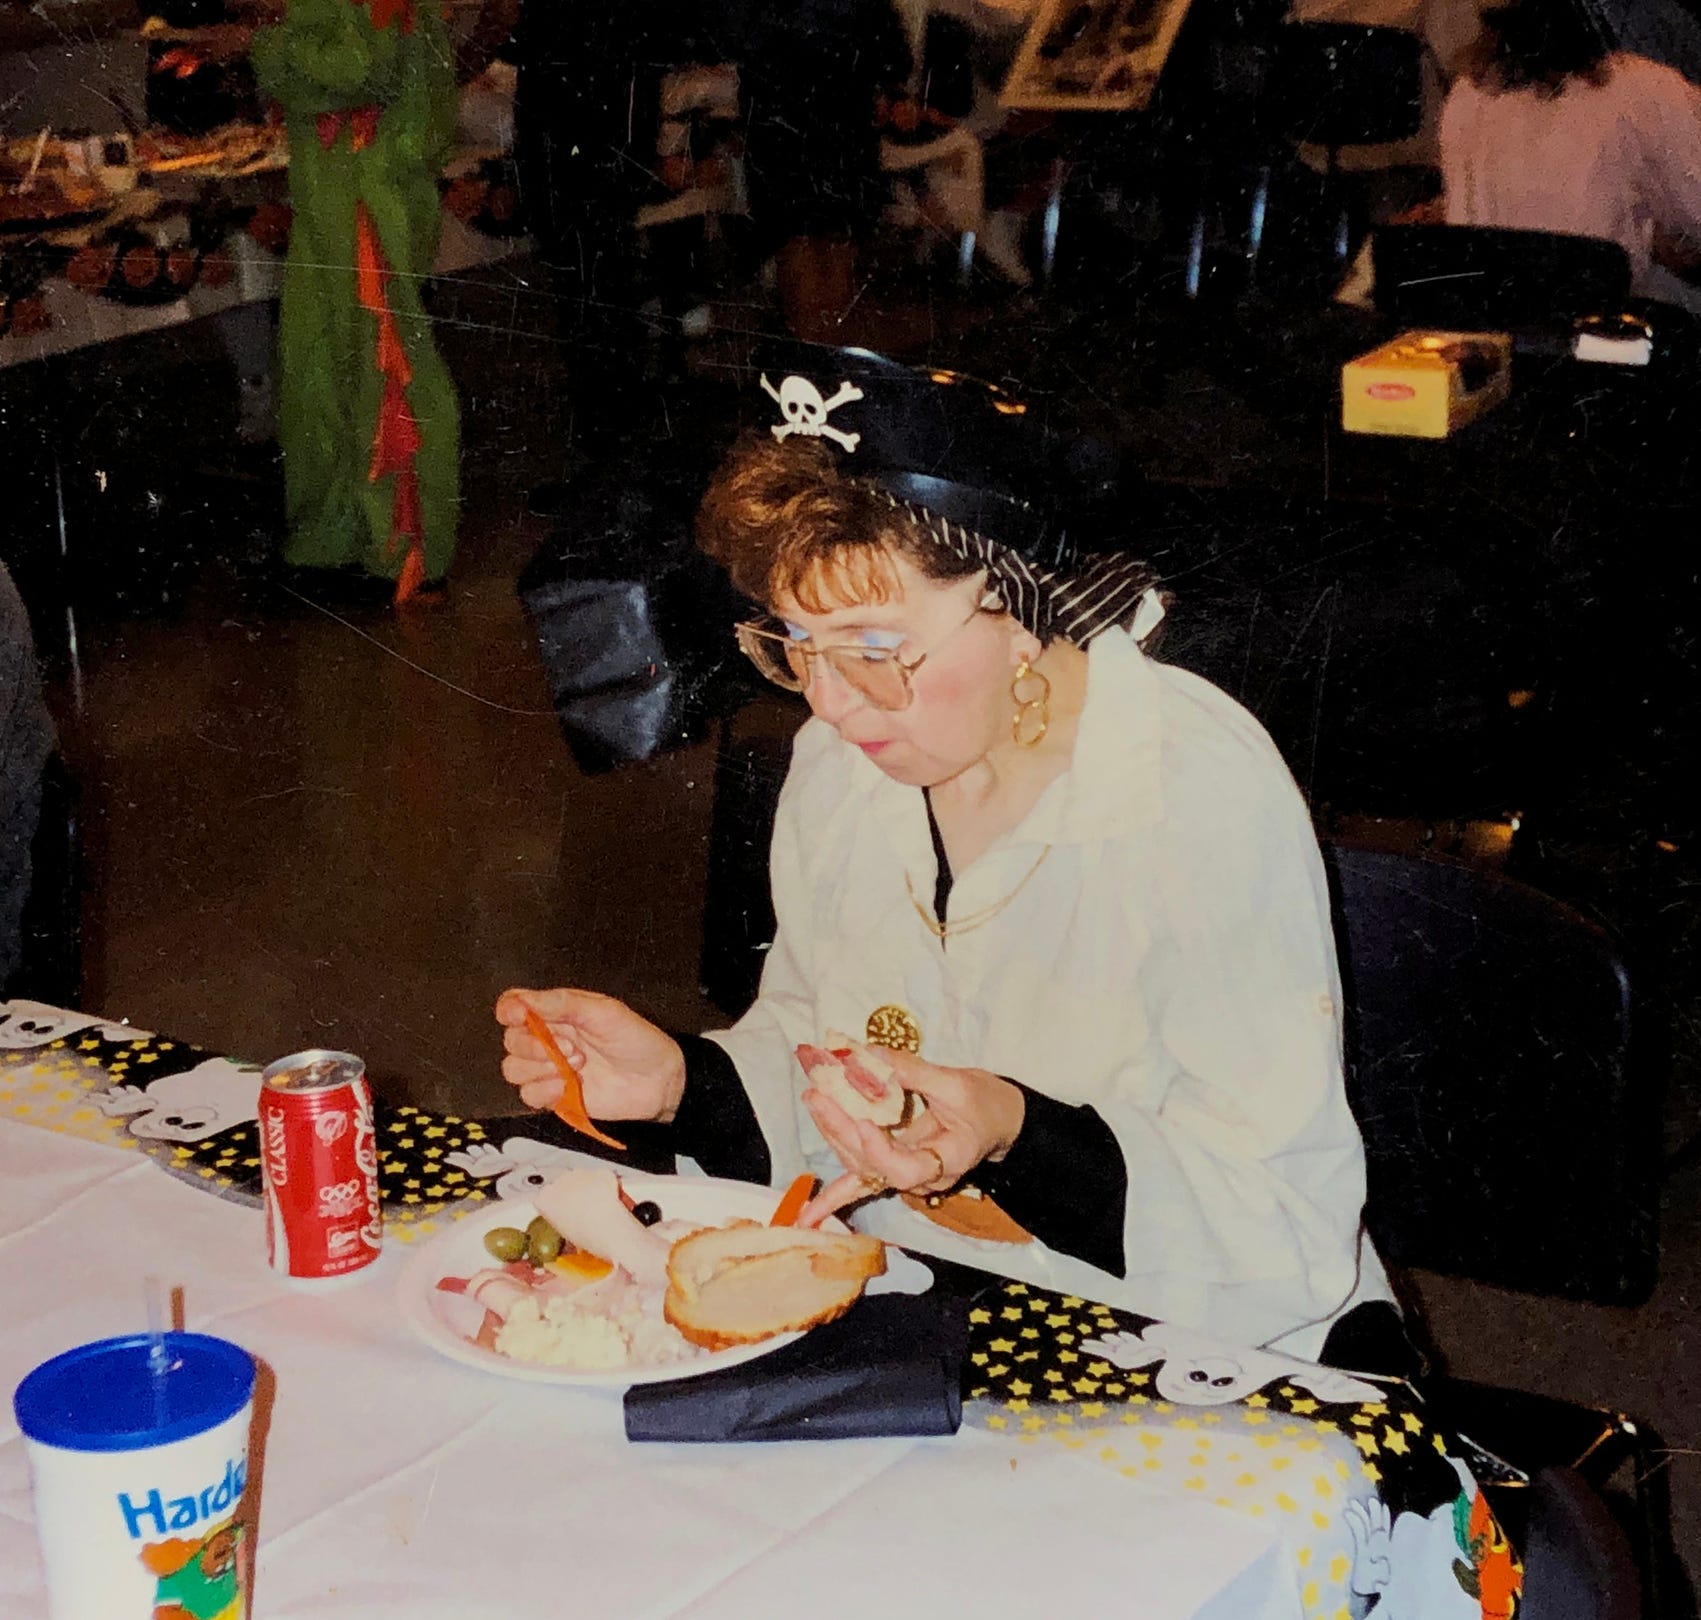 A picture of Sally Honeycheck taken on October 30, 1992.